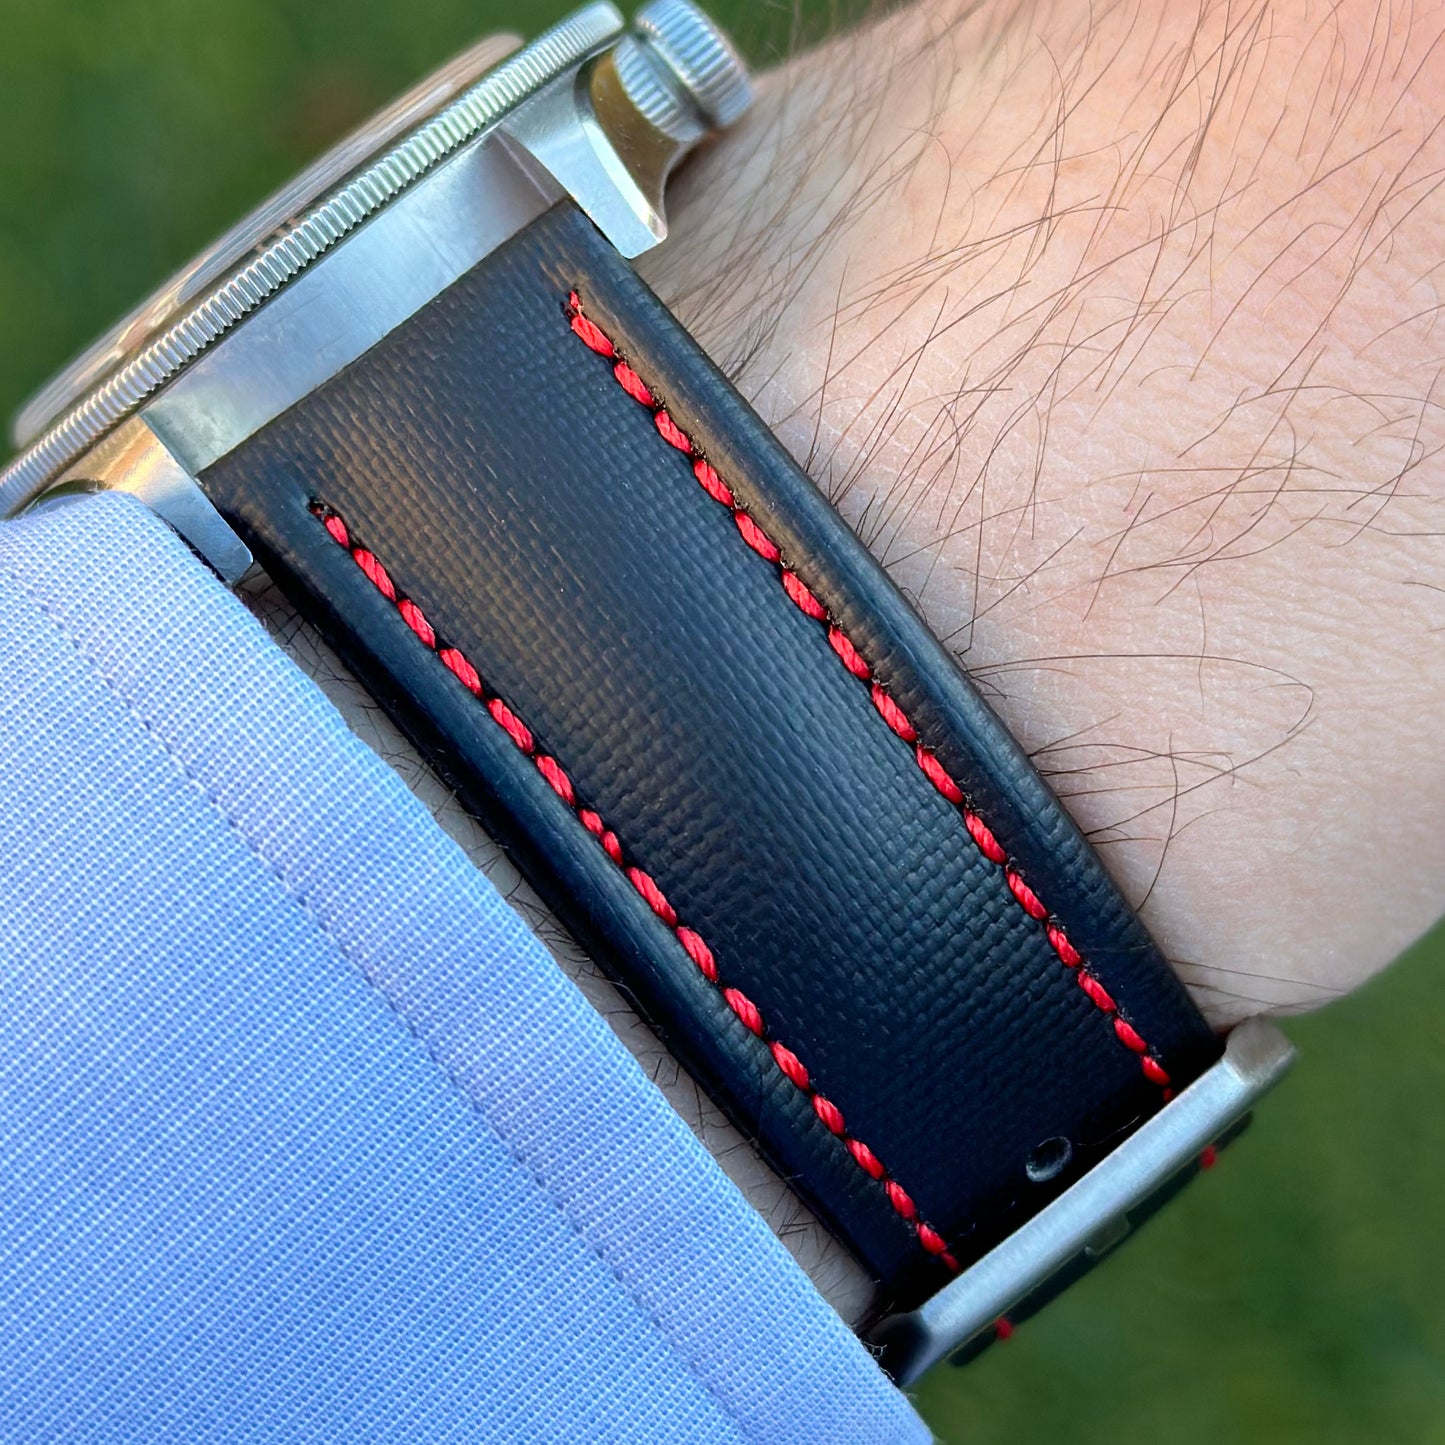 Wrist shot of the Bermuda jet black sail cloth watch strap with red stitching. On the Tudor Blackbay 58. Watch And Strap